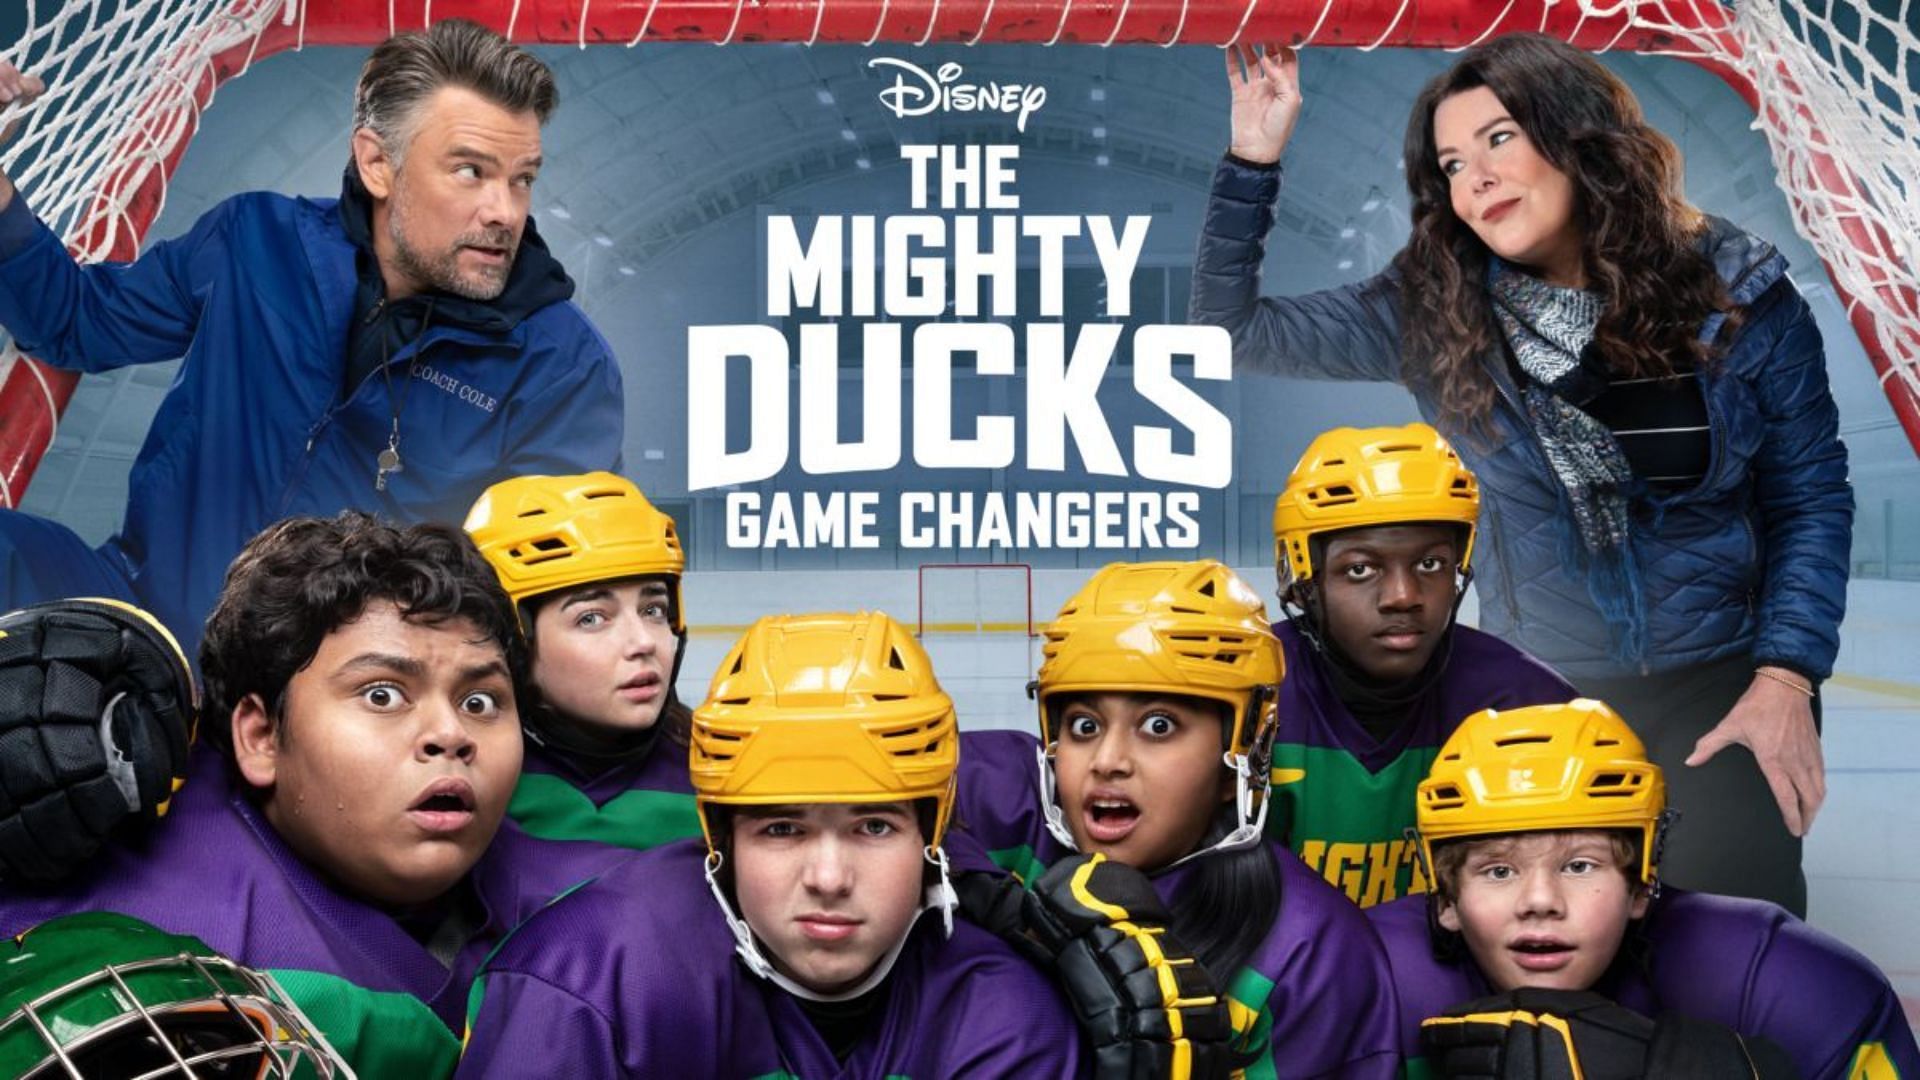 The Mighty Ducks: Game Changers Cast: Where You've Seen The Disney+ Actors  Before